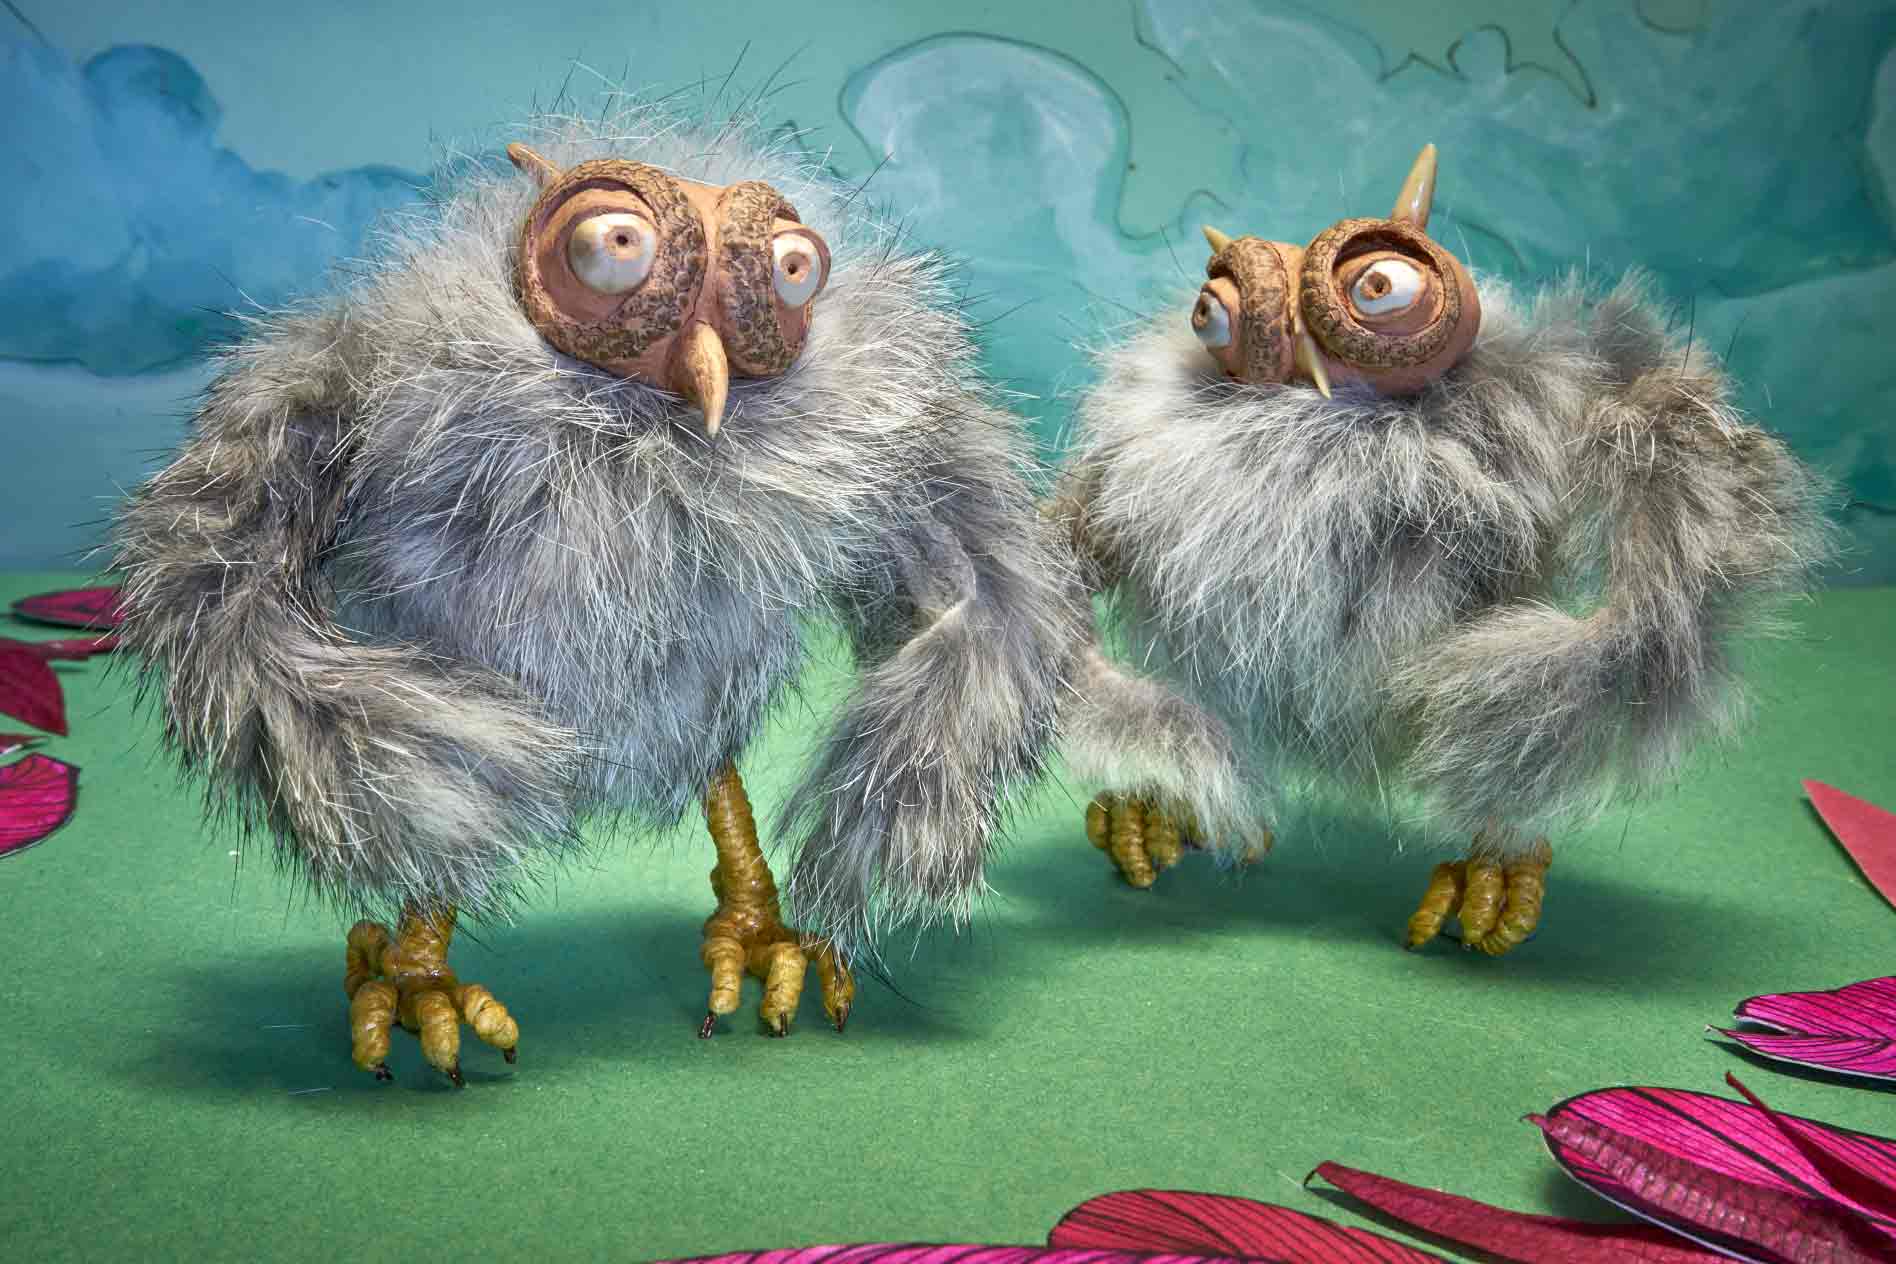 A cute pair of owl stop motion characters stand in a clearing surrounded by pink petals and a blue sky with fluffy clouds